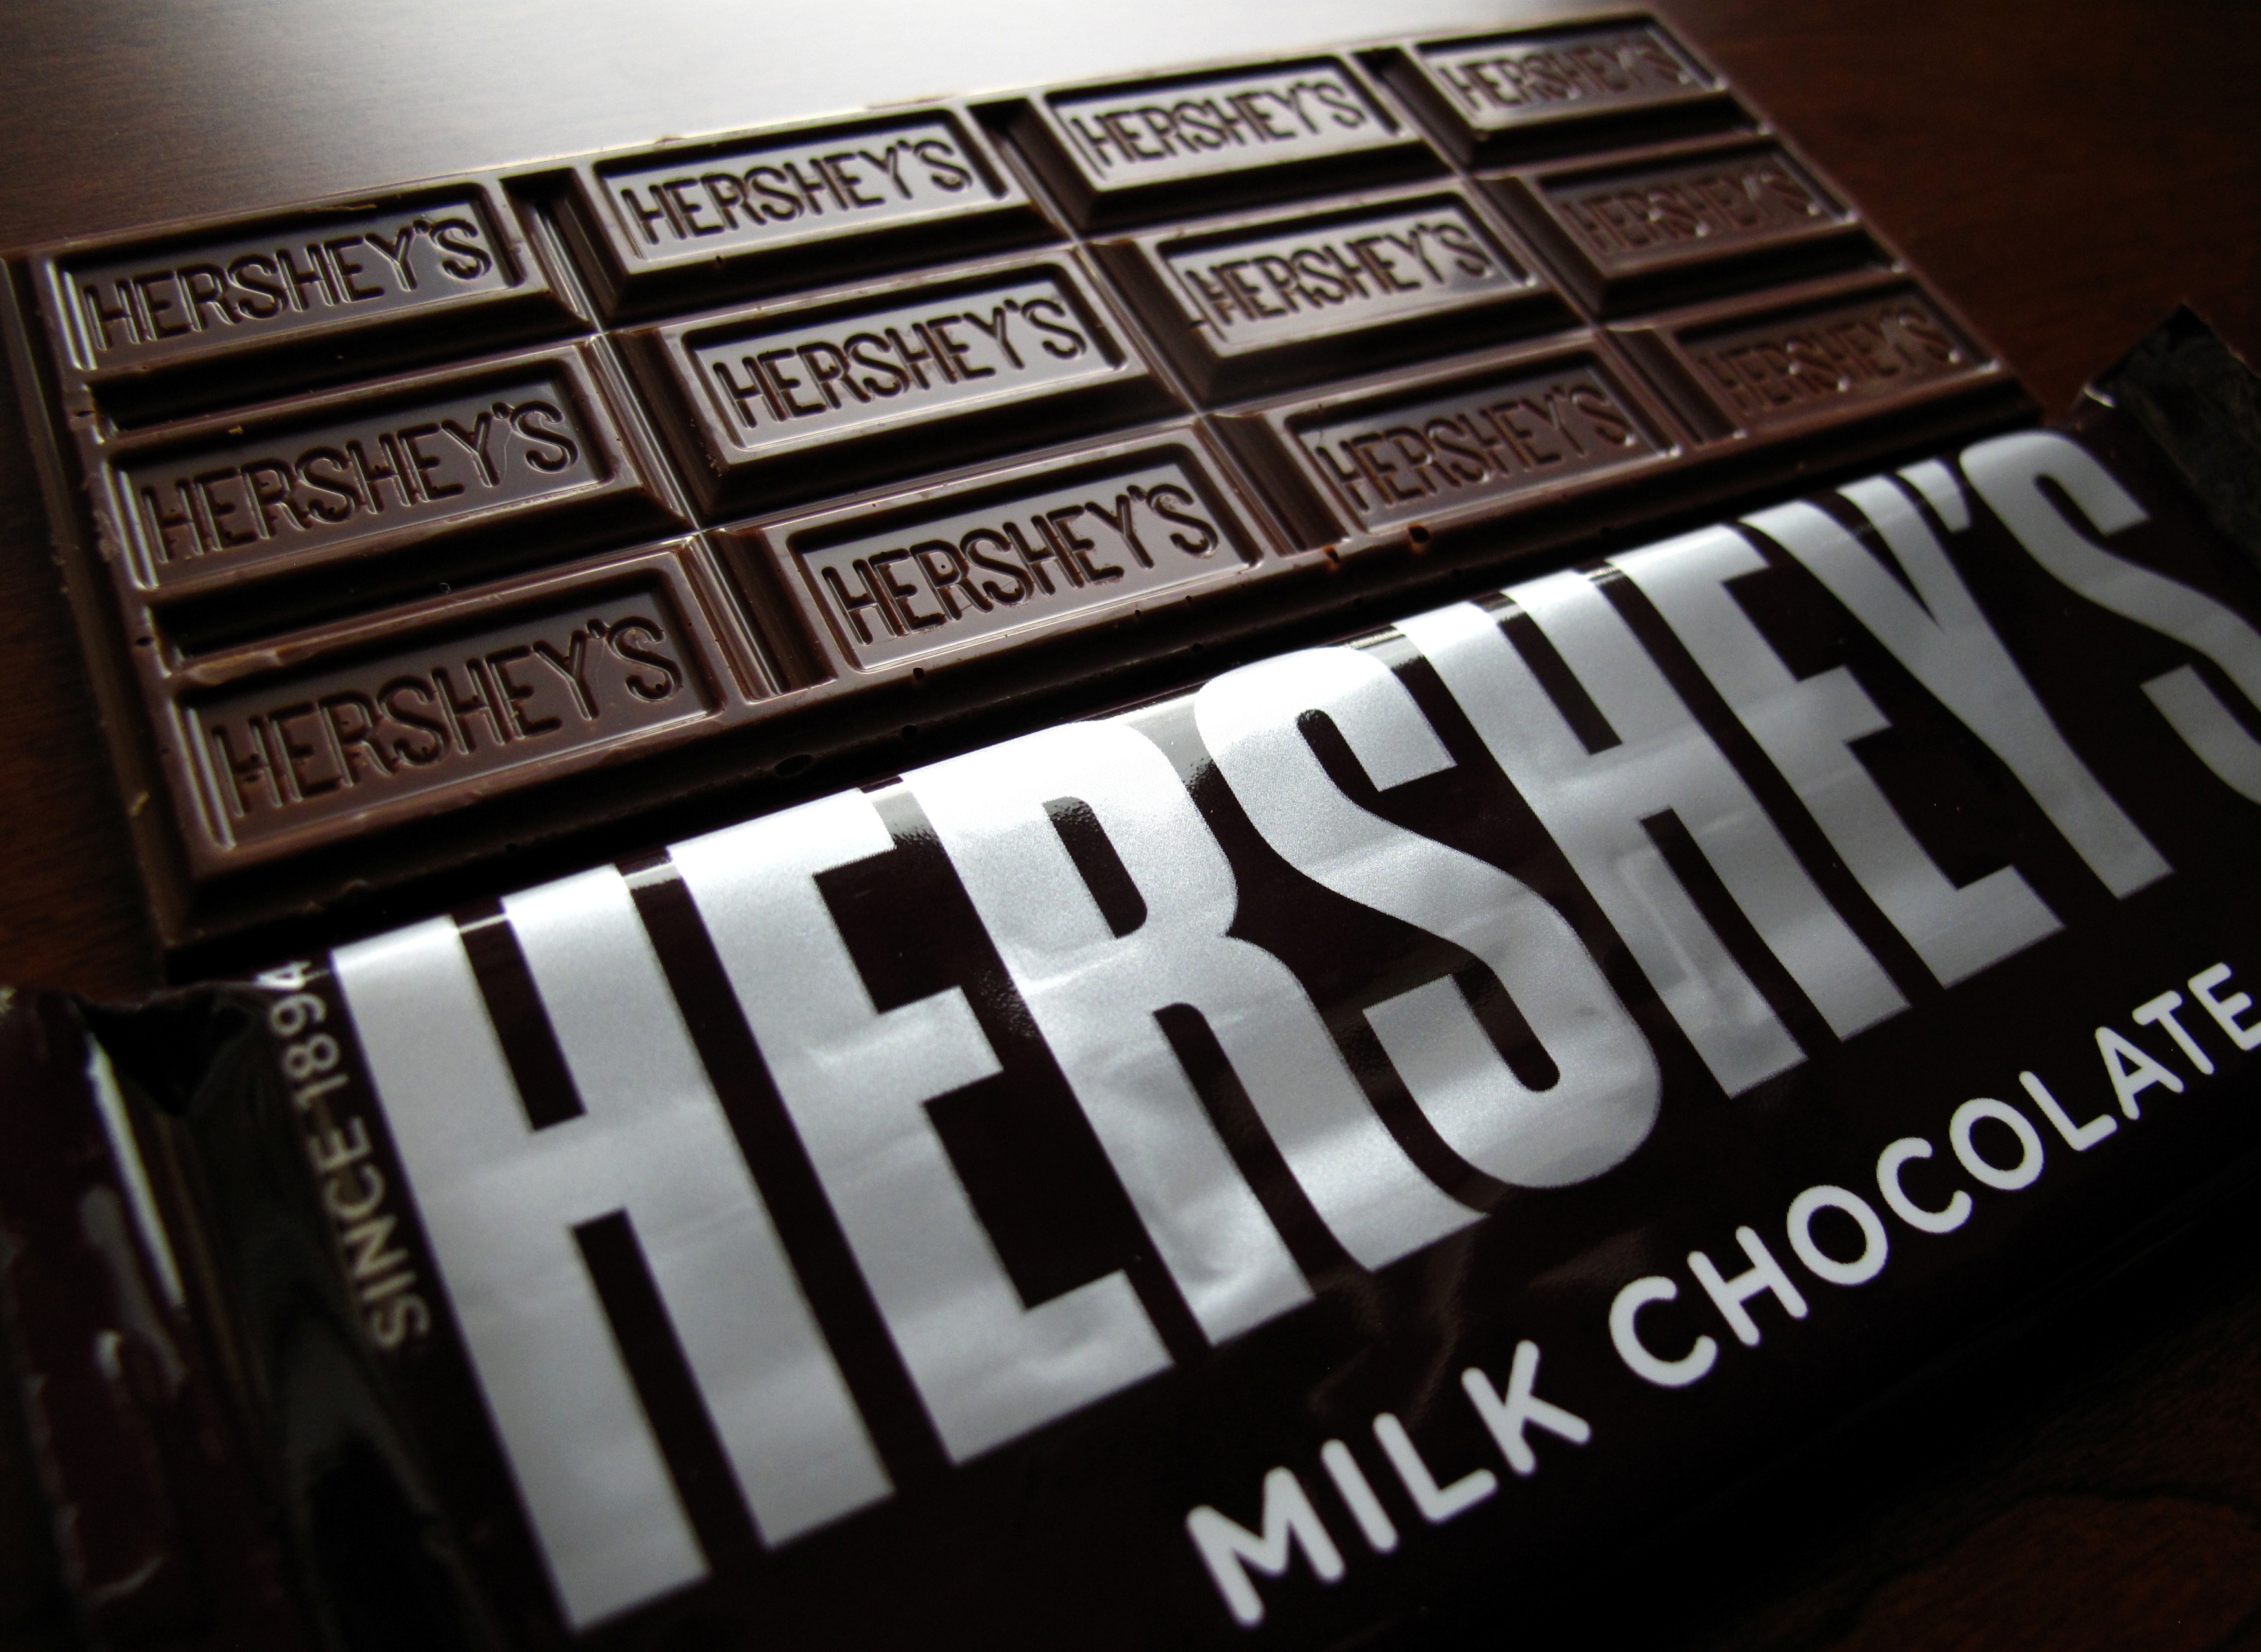 FILE PHOTO: Hershey's chocolate bars are shown in this photo illustration in Encinitas, California January 29, 2015. REUTERS/Mike Blake/File Photo